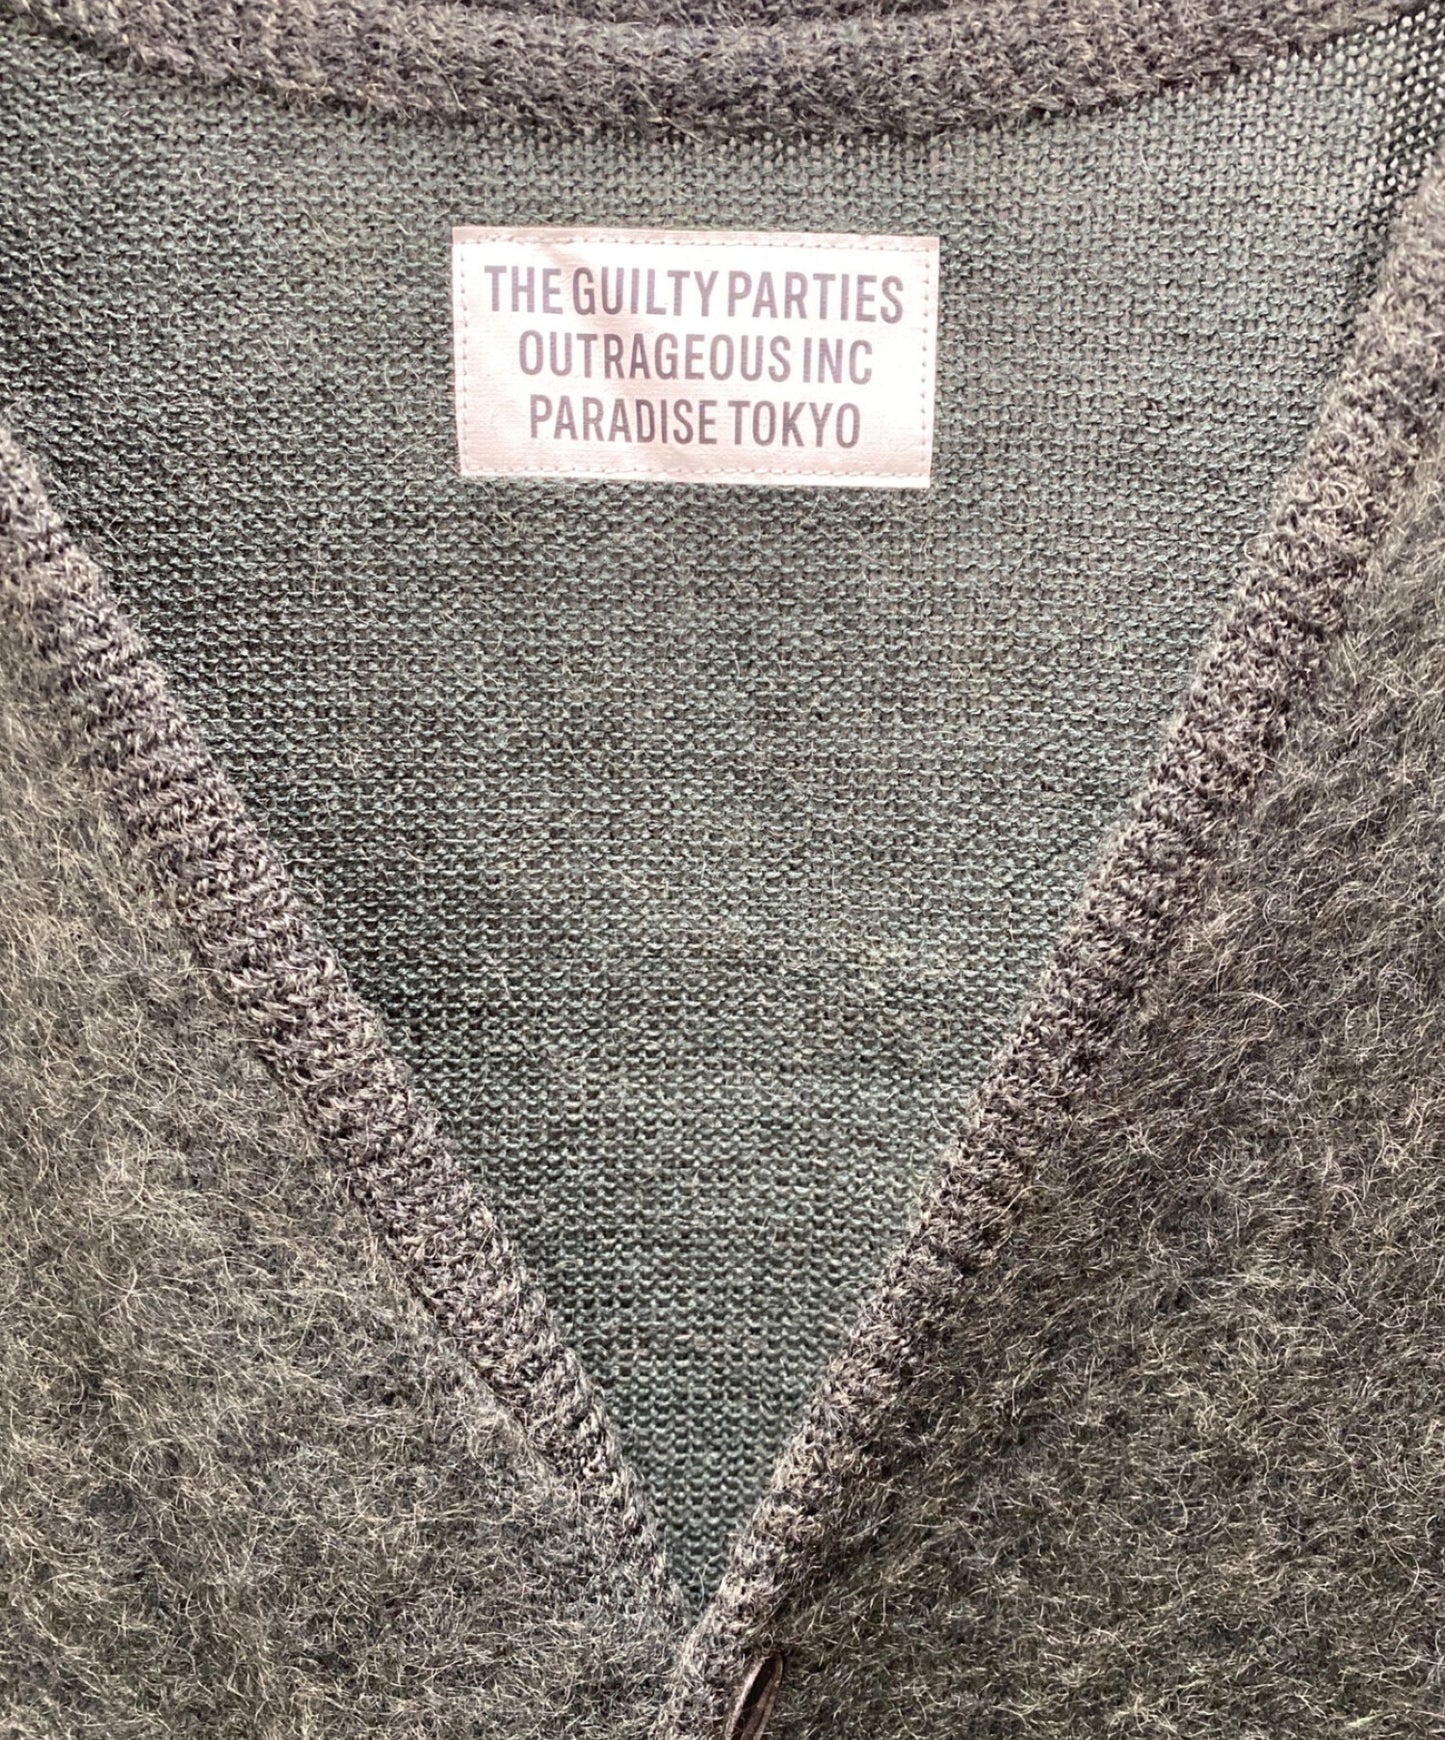 [Pre-owned] WACKO MARIA MOHAIR KNIT CARDIGAN